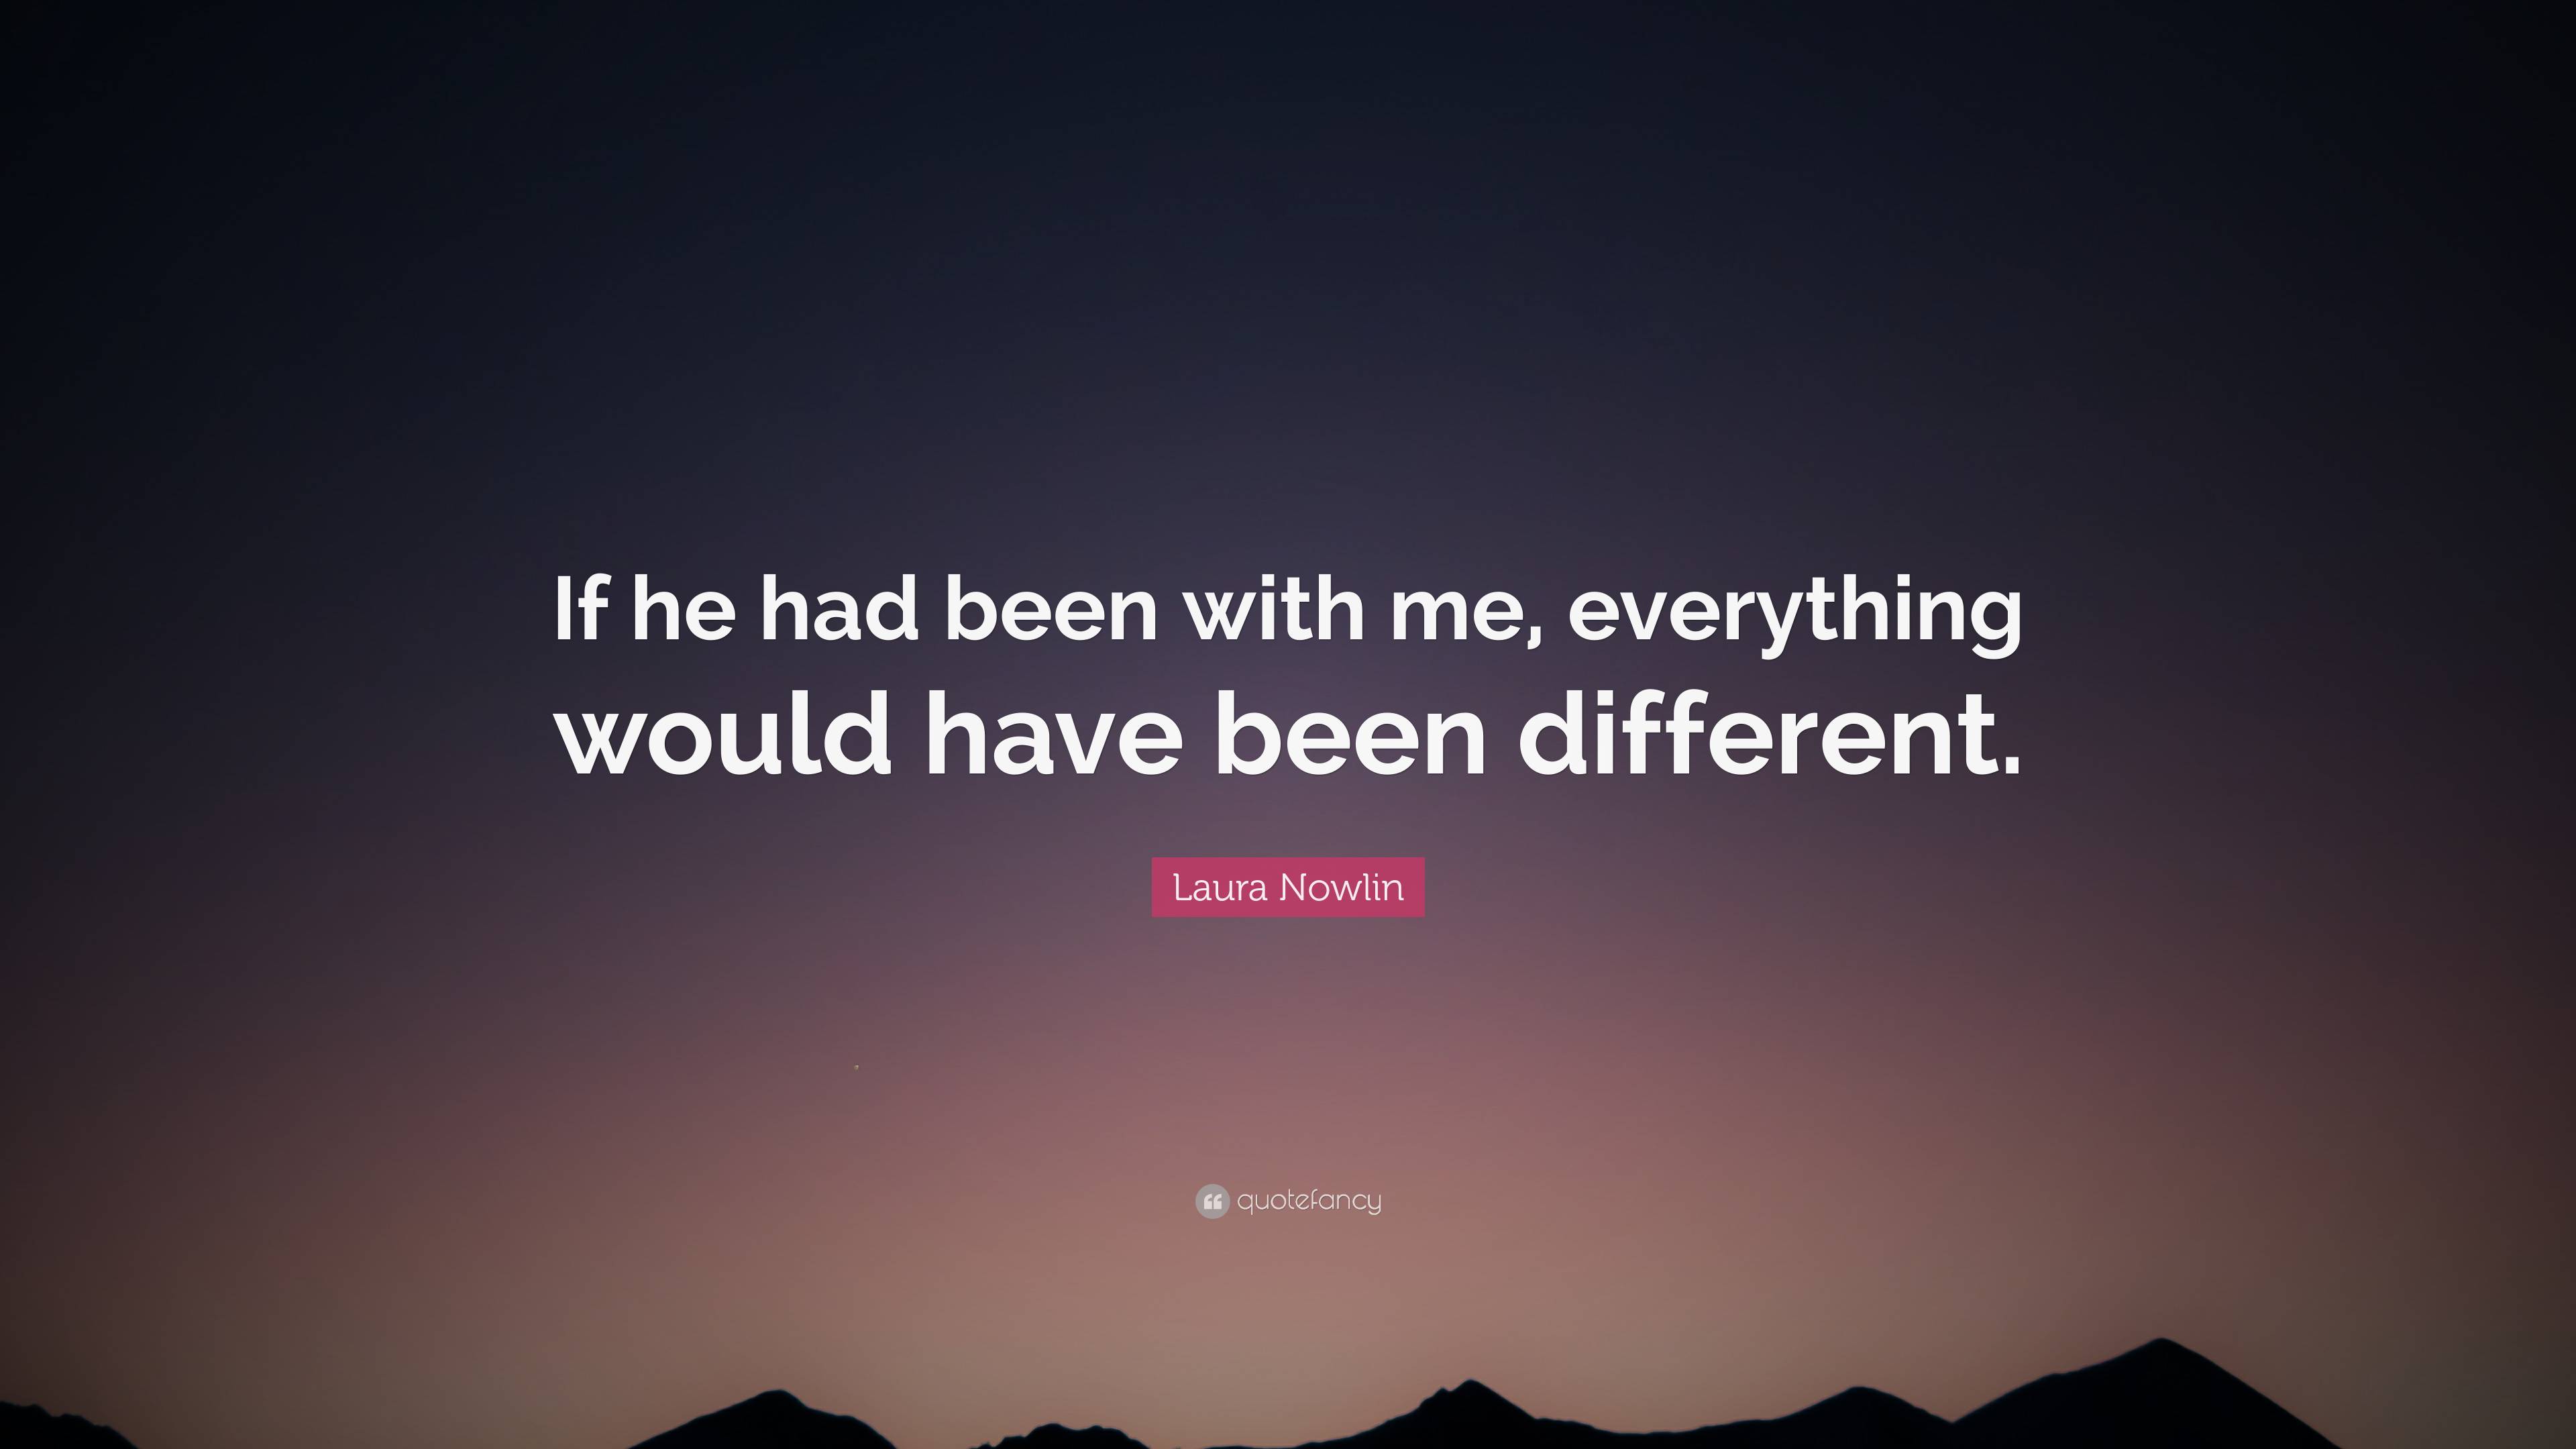 Laura Nowlin Quote: “If he had been with me, everything would have been  different.”